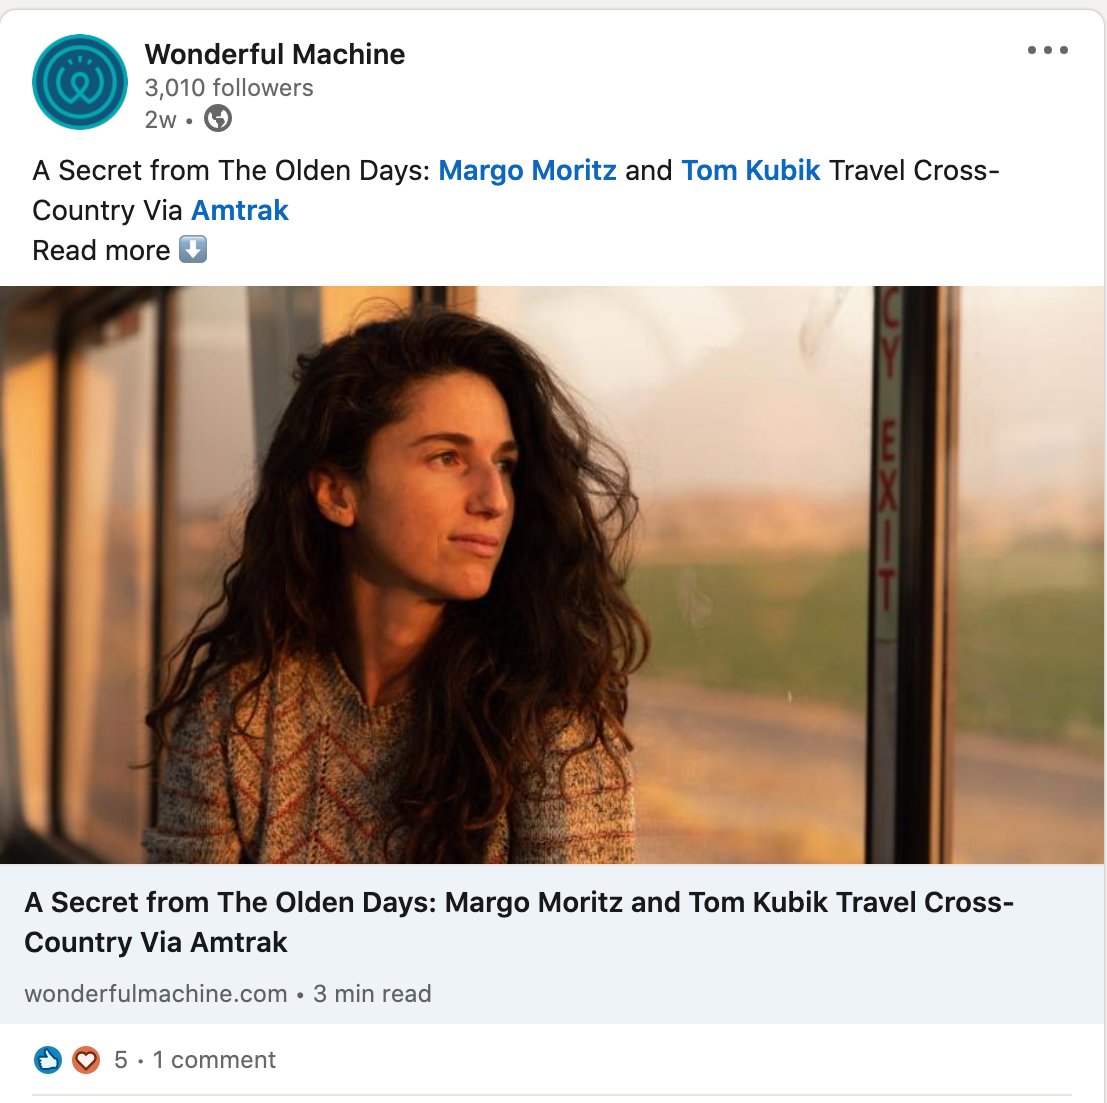 Margo Moritz's LinkedIn post about her cross country travels via train